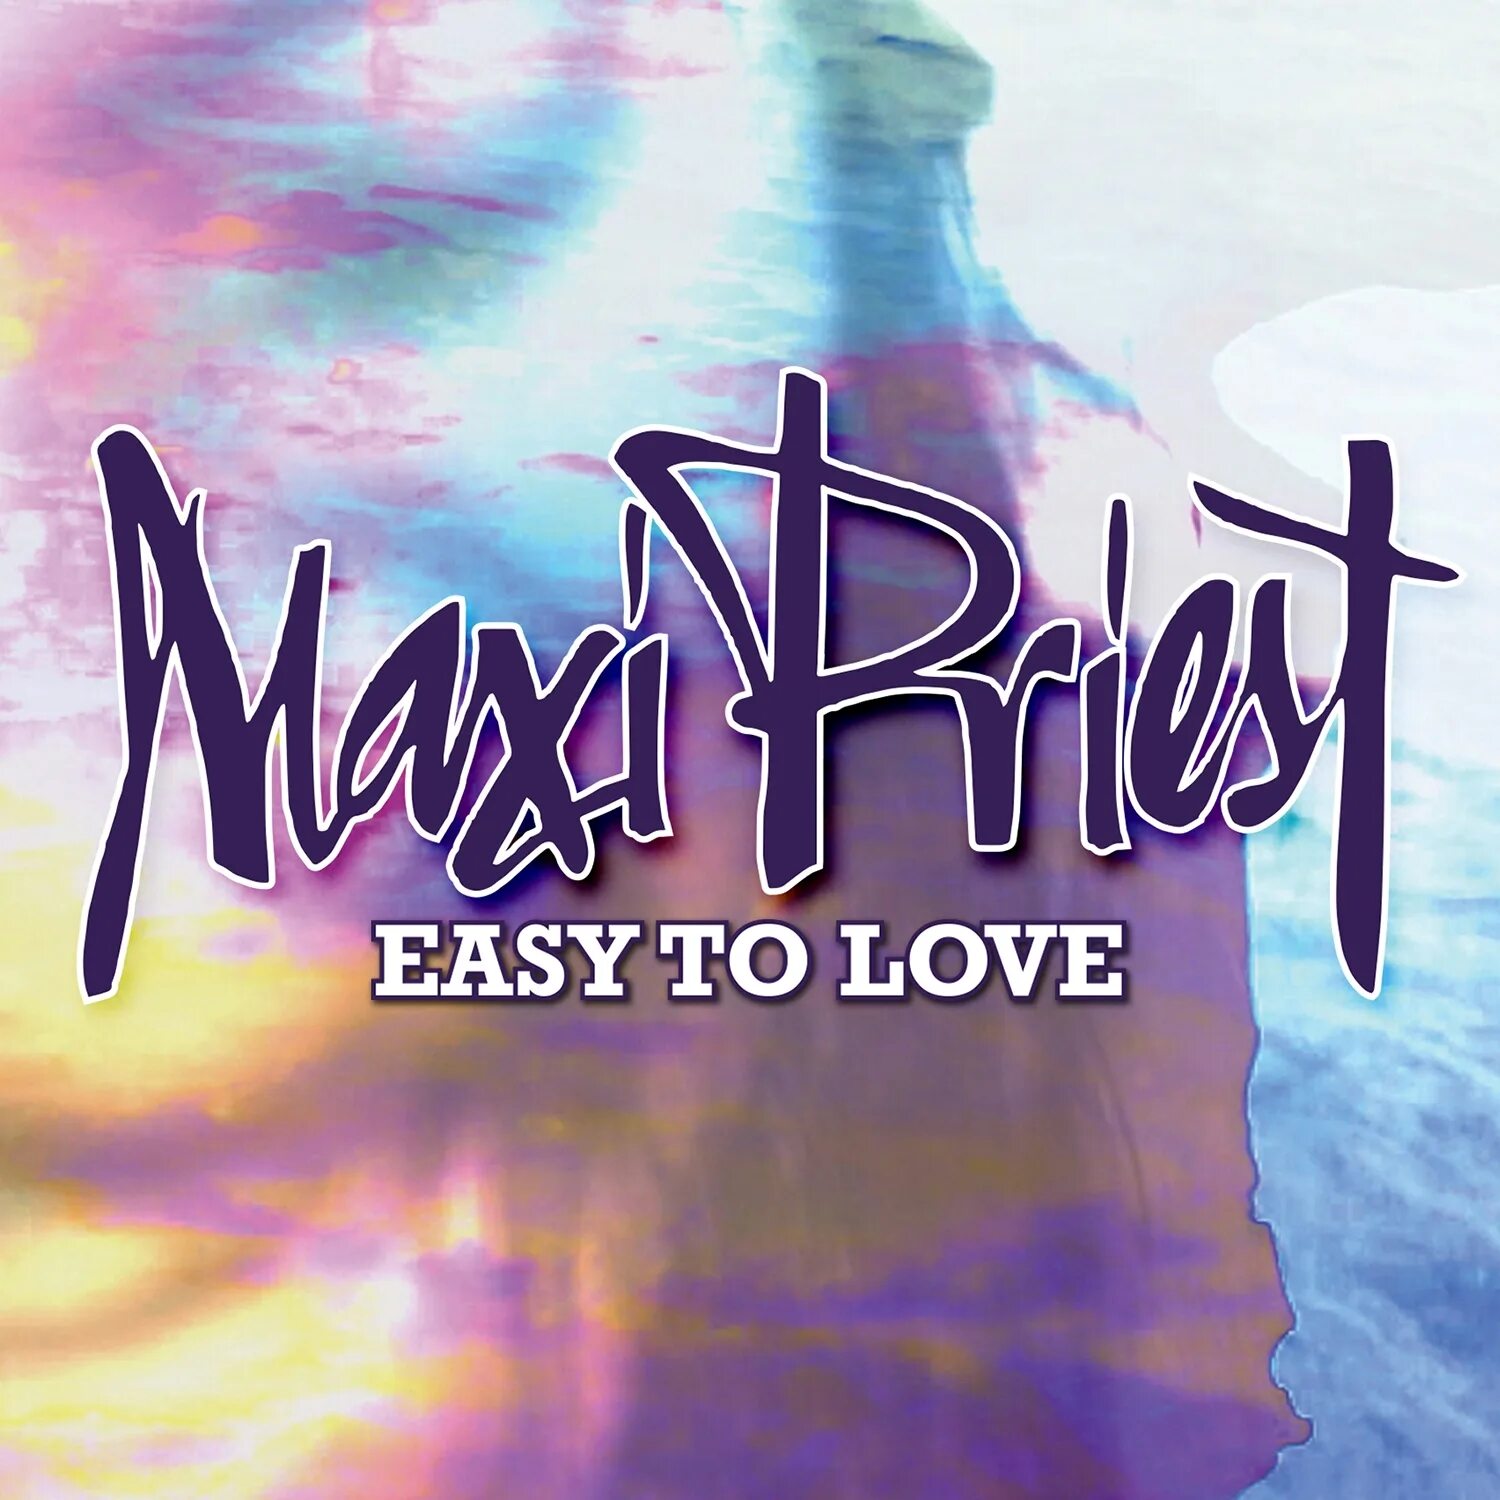 Maxi priest. Easy to Love макси прист. Maxi Priest easy to Love (Remix) (feat. Stylo g). Maxi Priest logo PNG.